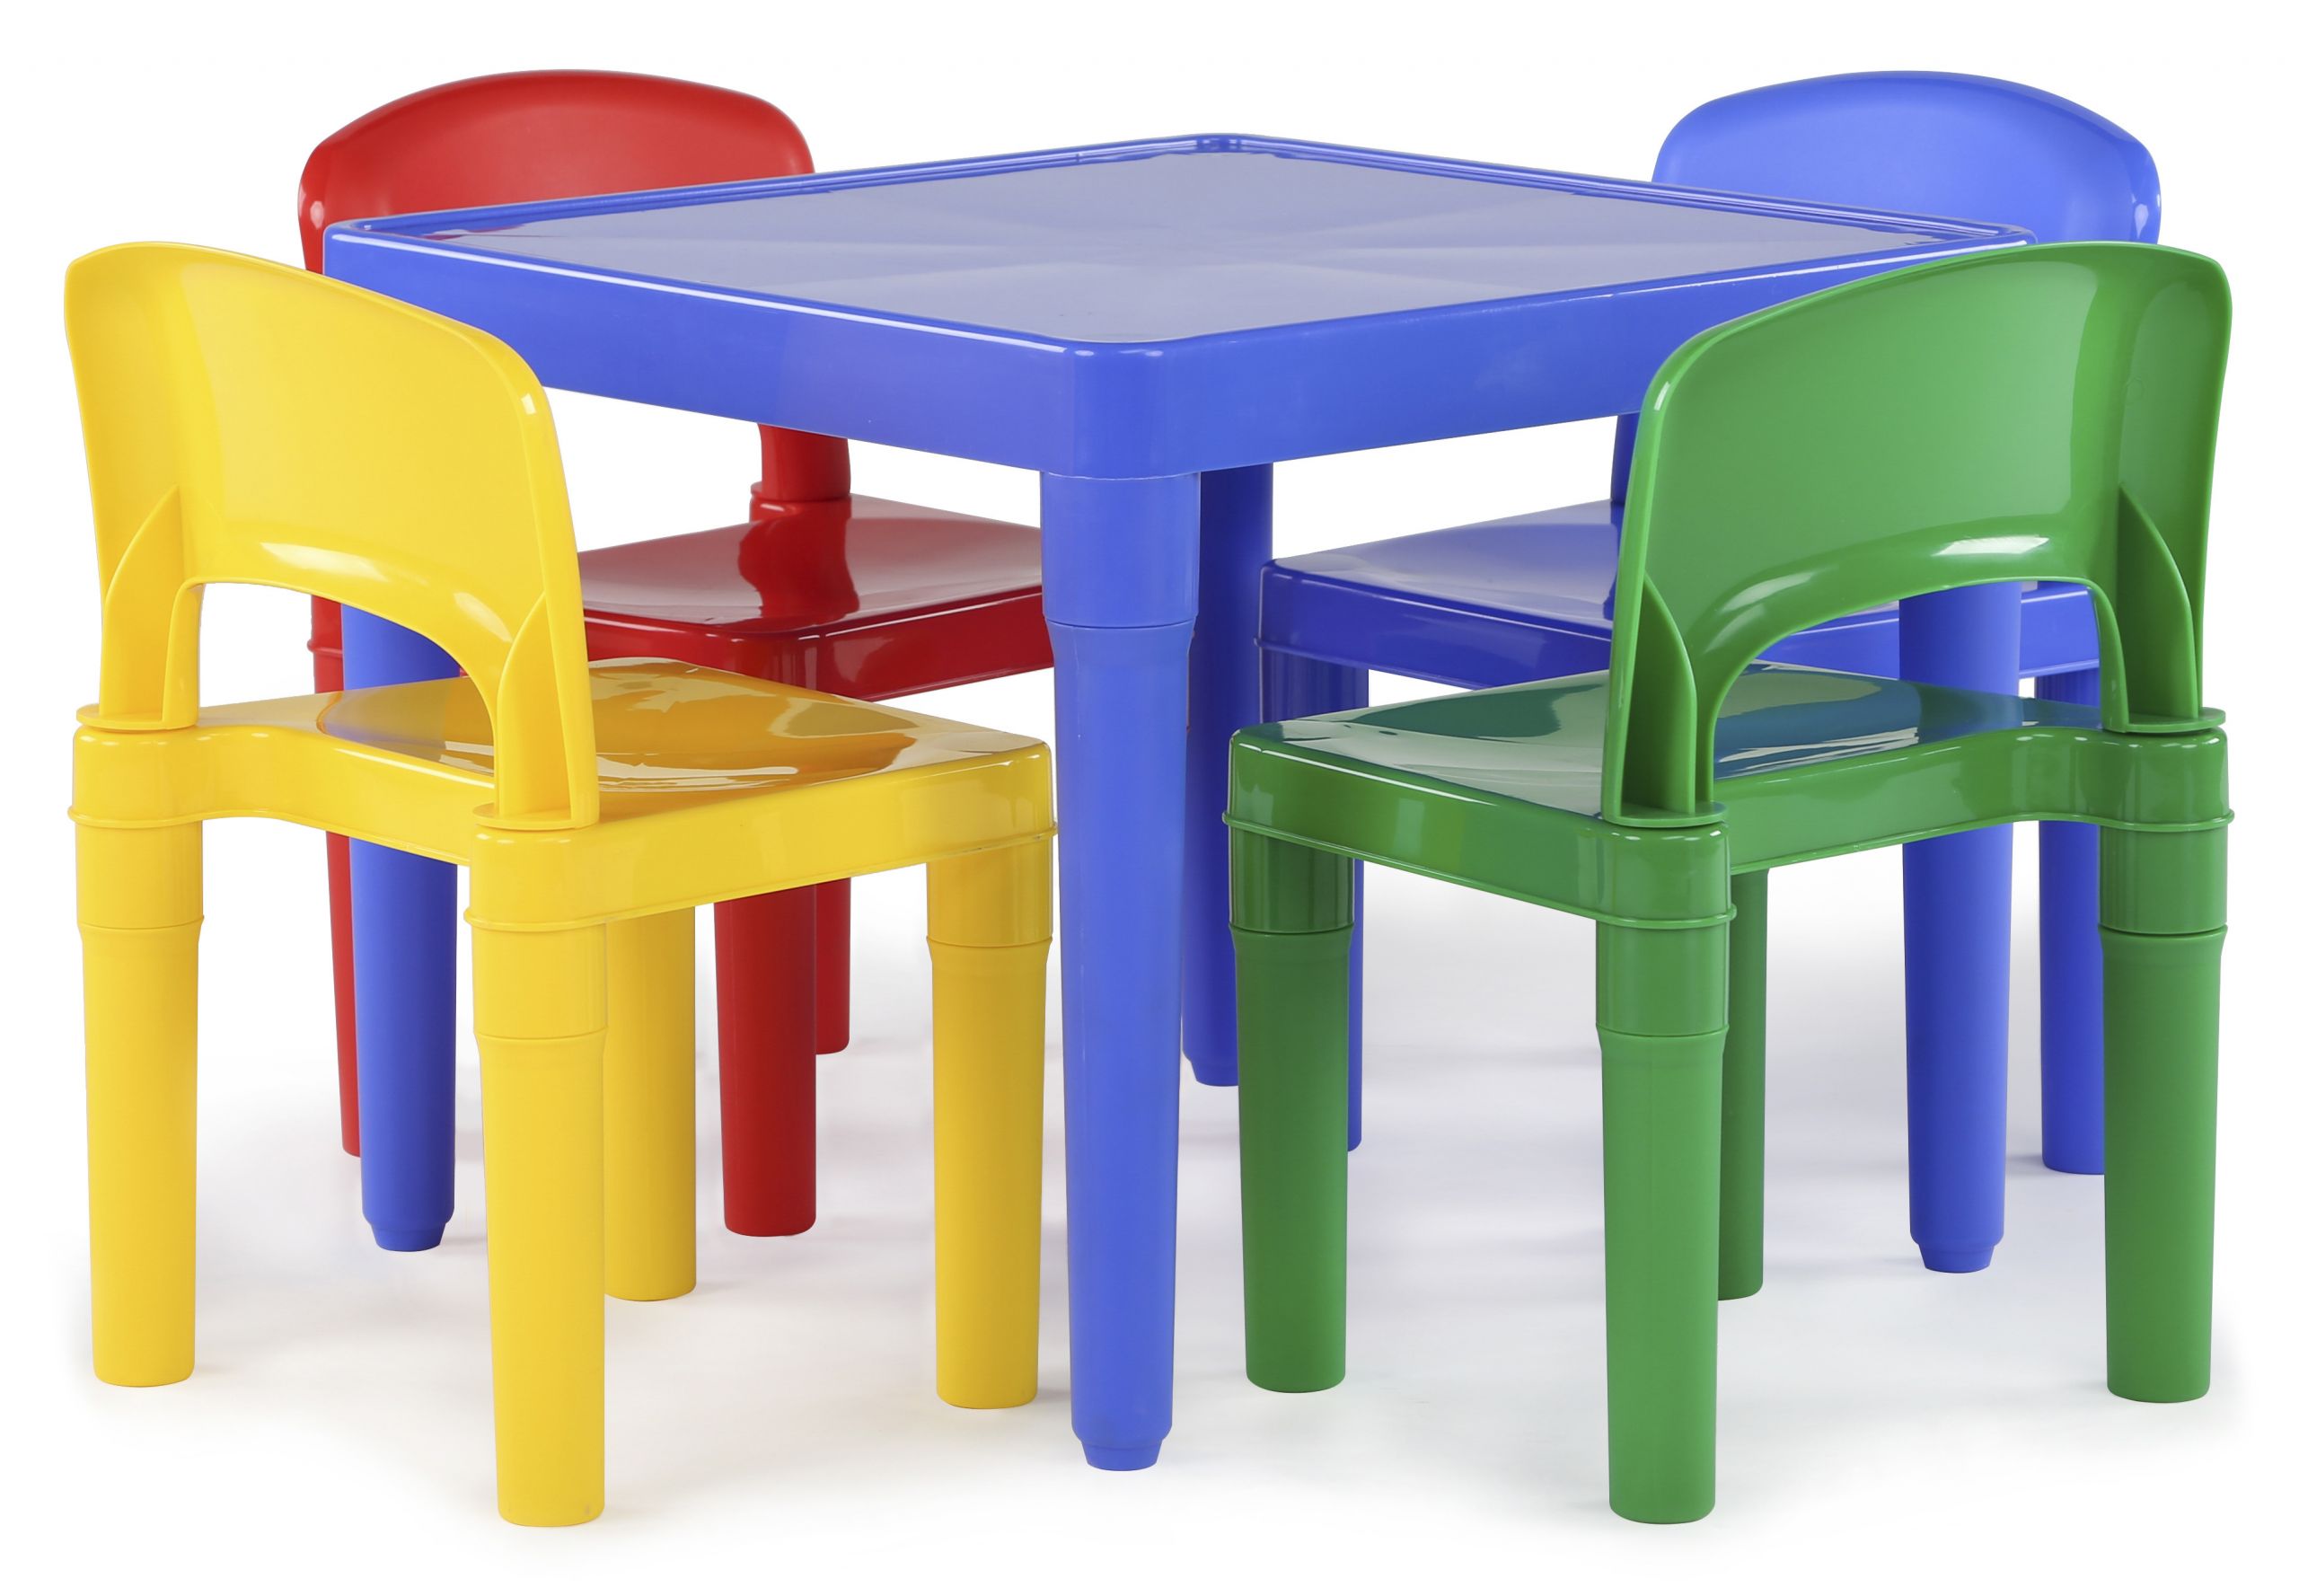 Kids Outdoor Table And Chairs
 Tot Tutors Kids Plastic Table and 4 Chairs Set Primary